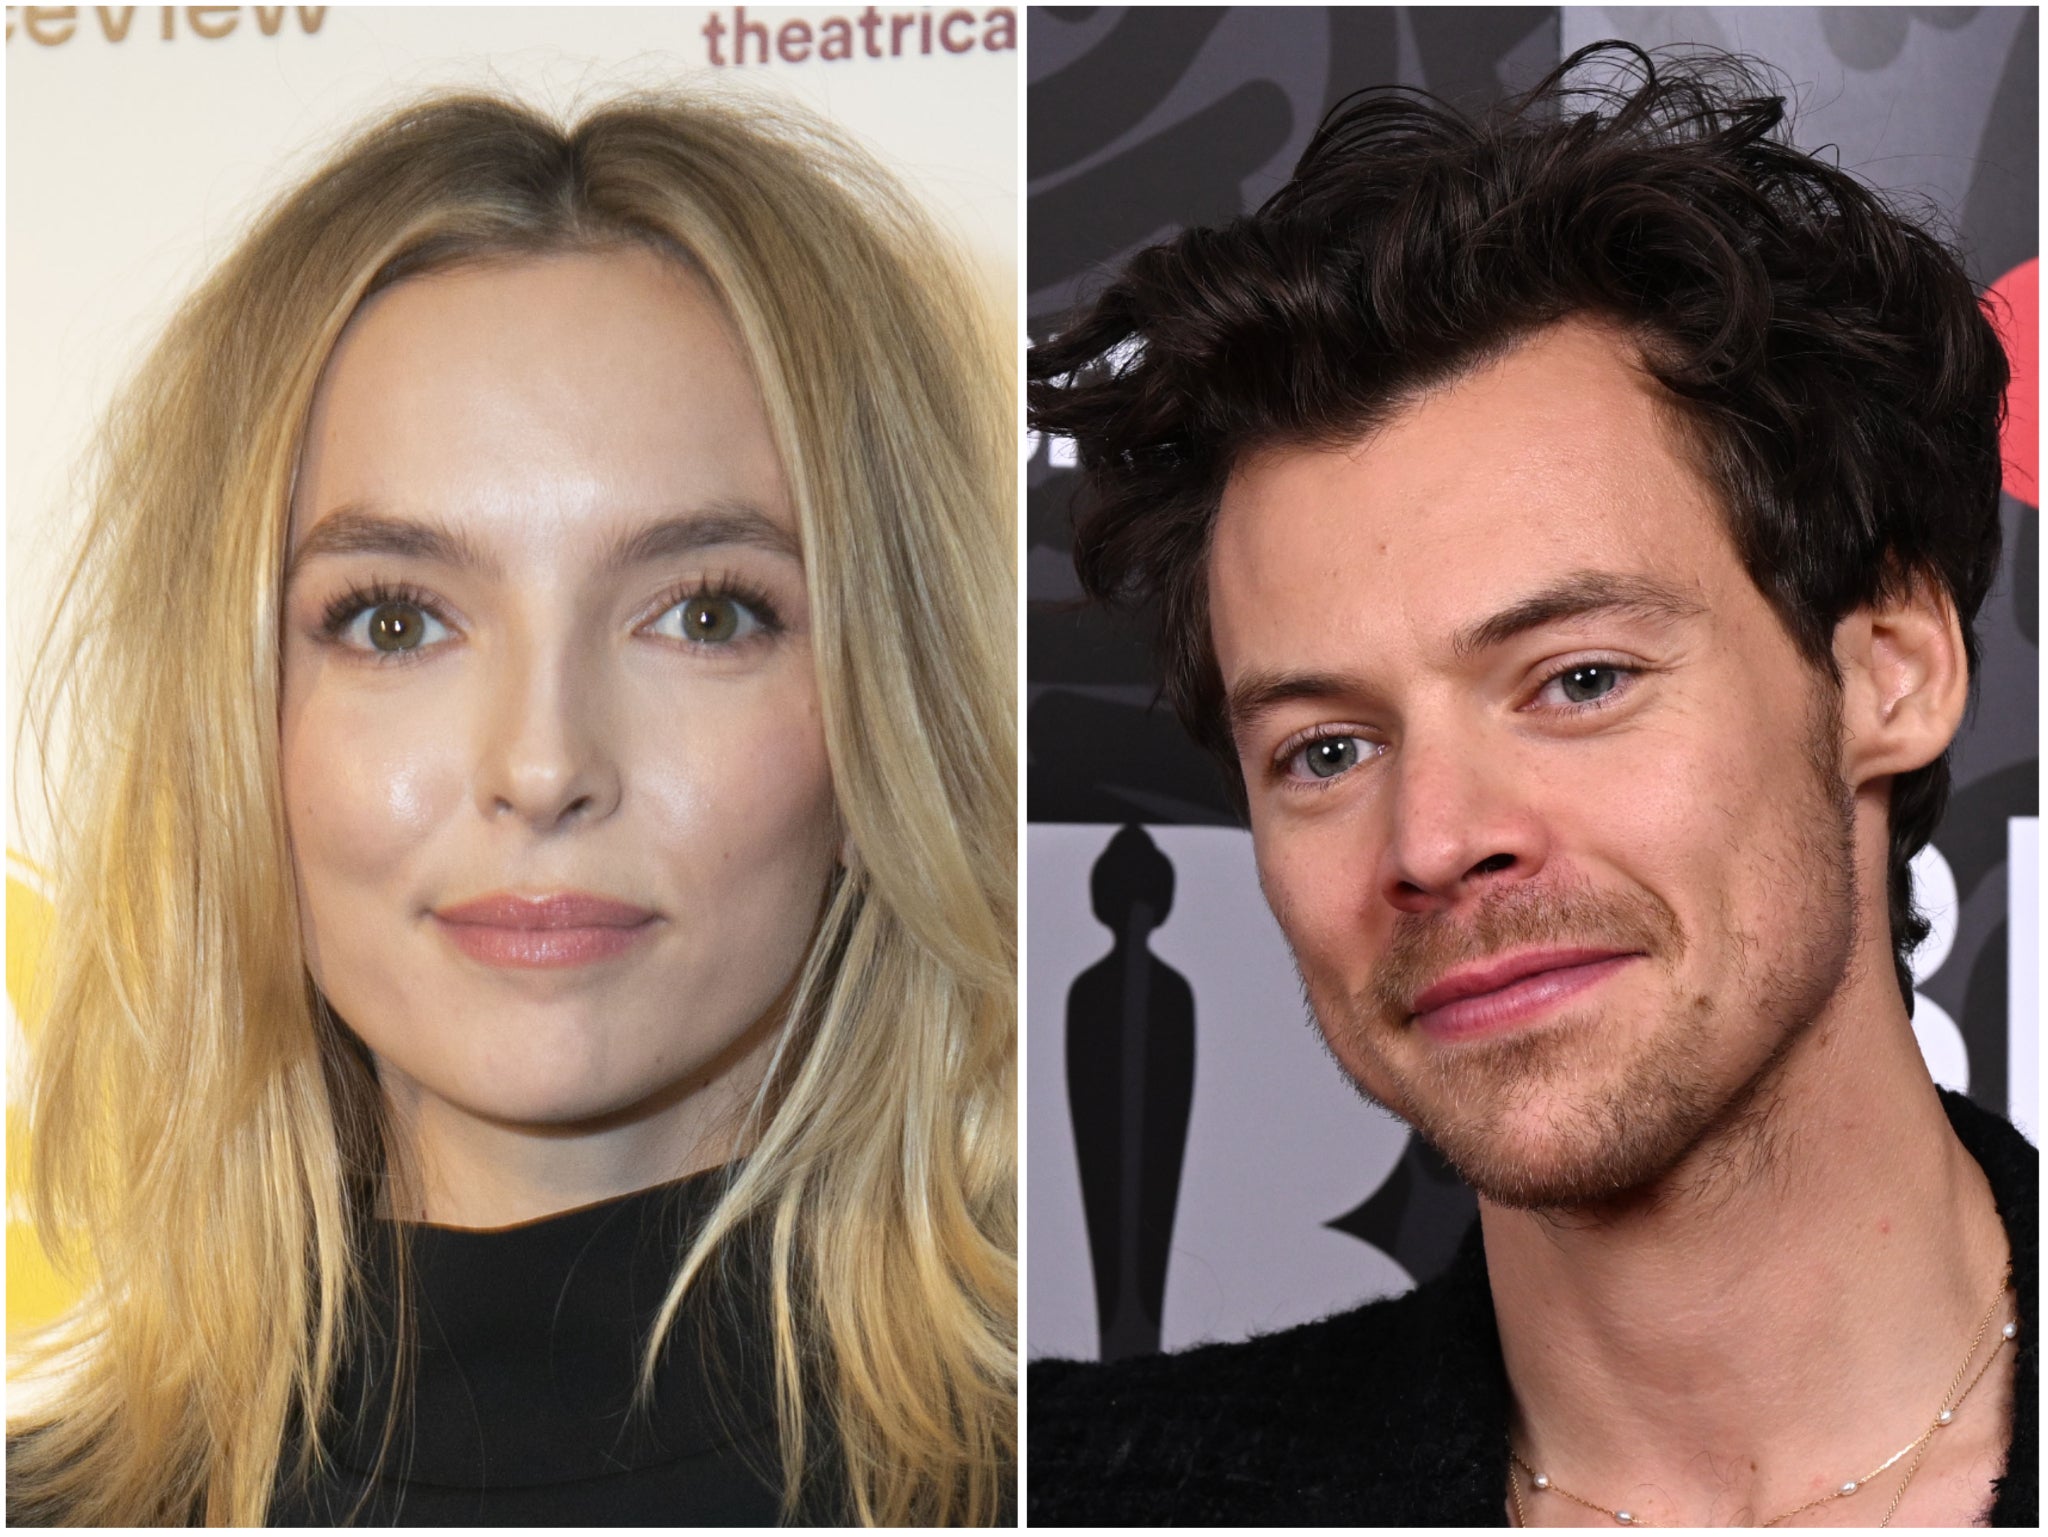 Jodie Comer and Harry Styles both won awards from gender-neutral categories